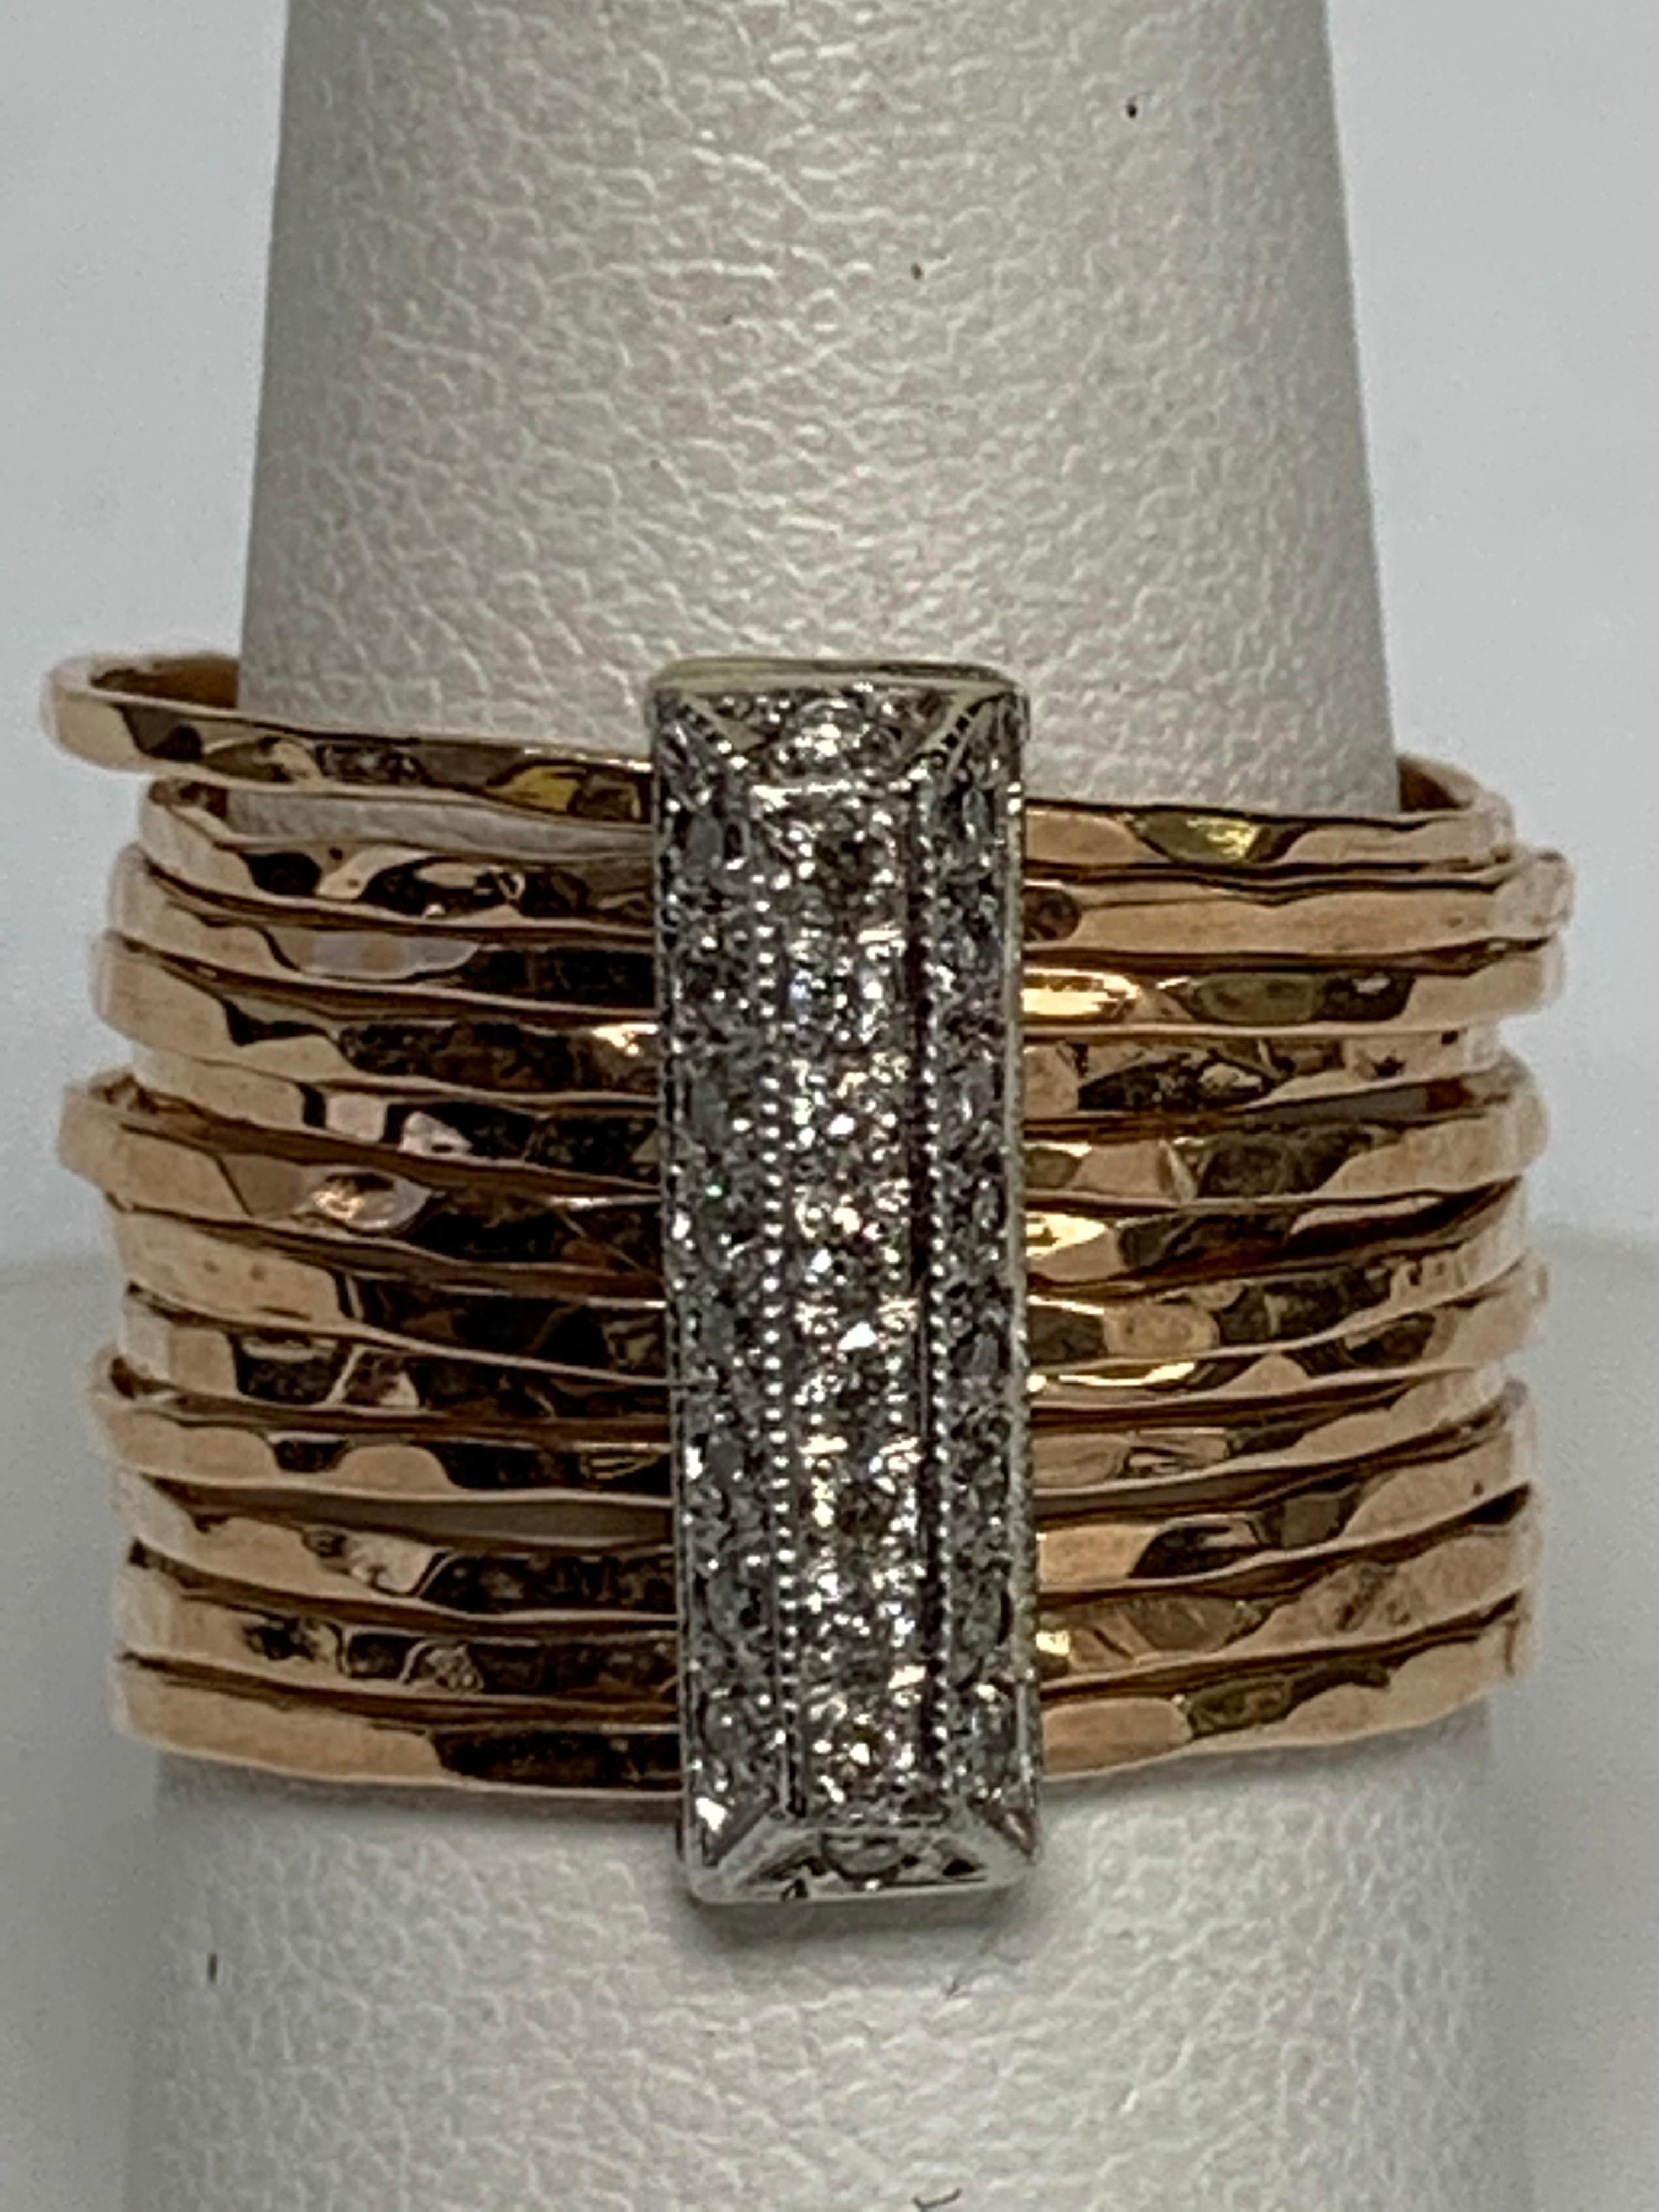 Pave Diamond White Gold Brick, 14K Rose Gold Stacked Ring. 

Featuring a 14K rose gold ring with a pave diamond 14K white gold brick.

Size 7 (resizable)
Custom Design

Through the expertise behind the philosophy “Designs That Define,” Addison